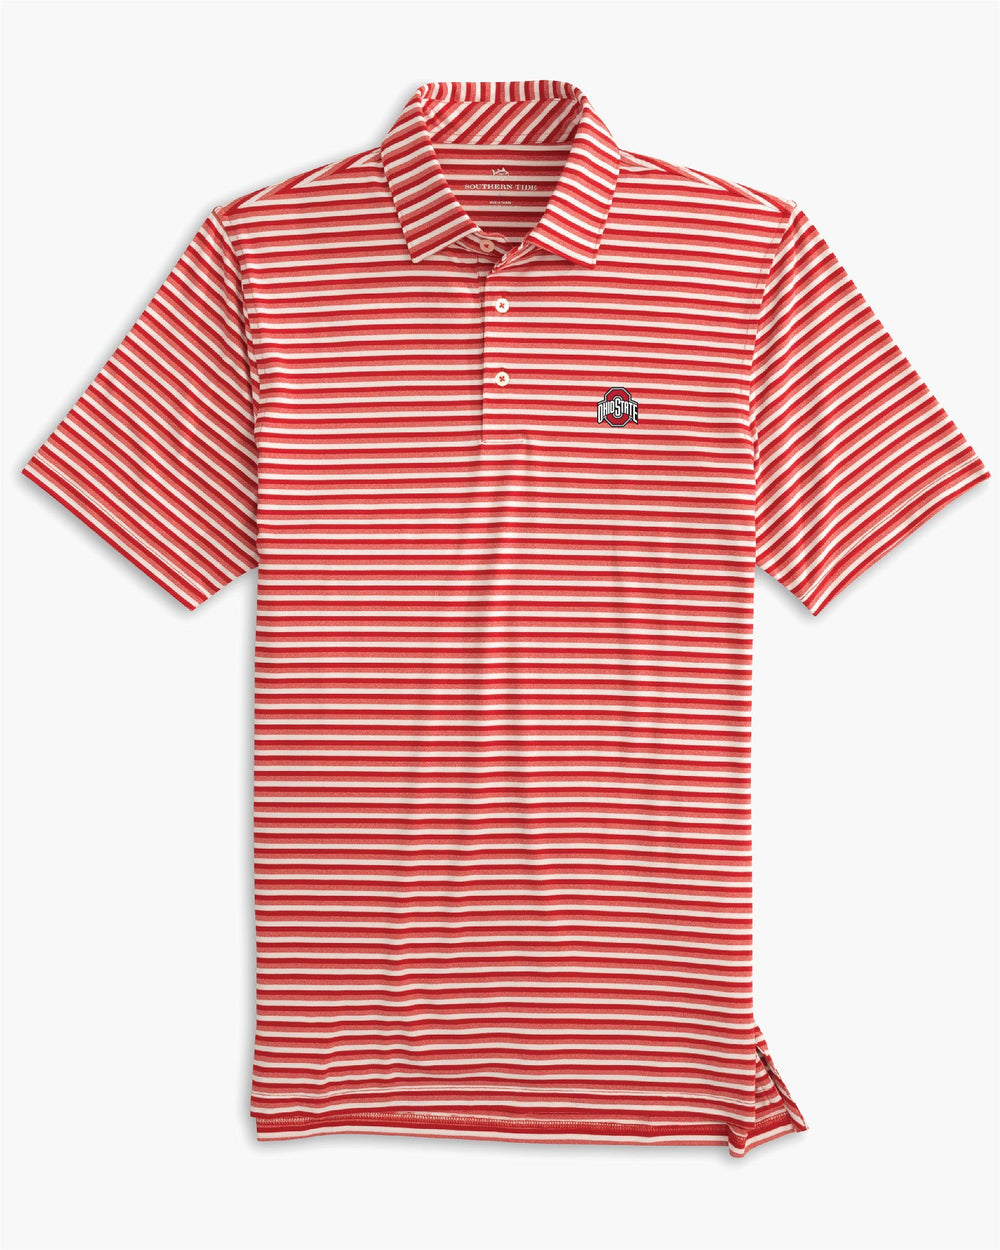 The front of the Men's Ohio State Buckeyes Heathered Striped Performance Polo Shirt - Varsity Red